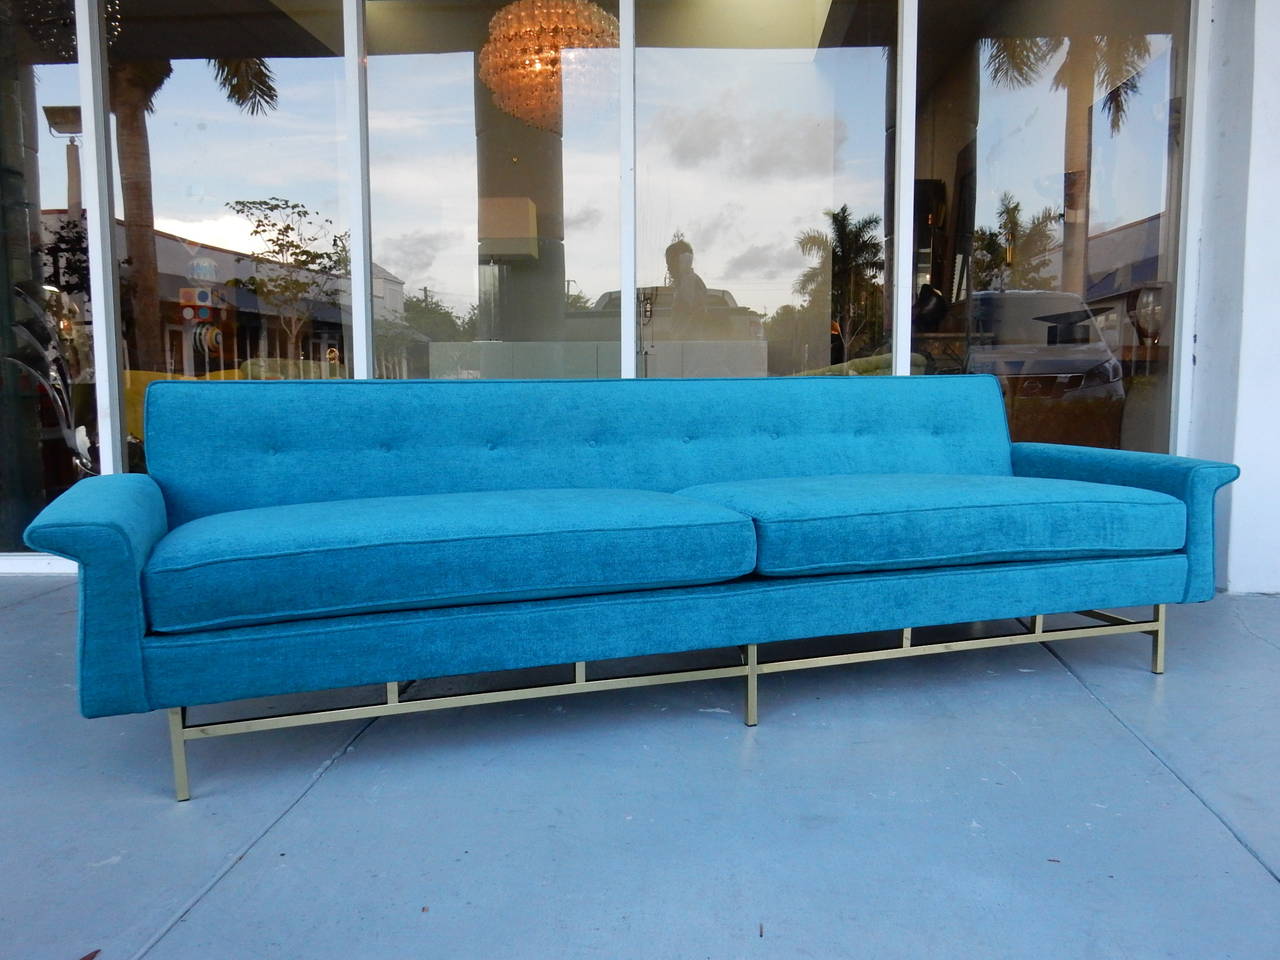 Stunning sofa. Classic 1960s design, with a low profile and polished brass bases. Super comfortable/